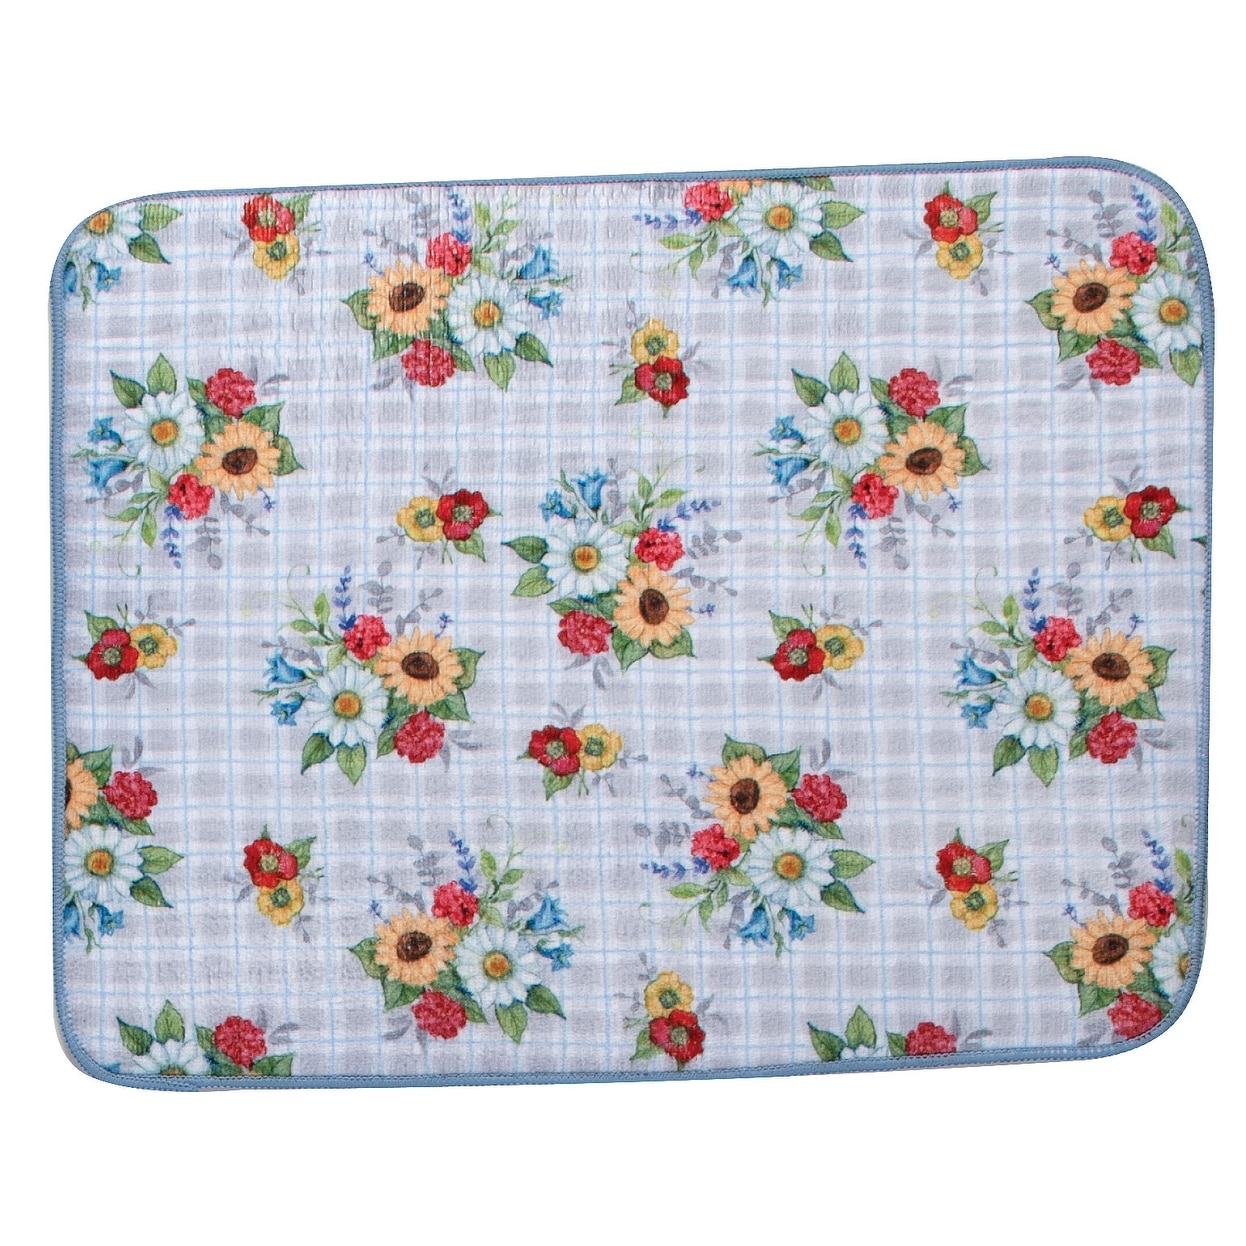 https://ak1.ostkcdn.com/images/products/is/images/direct/968c9cb812077c9b5ea461a82d4c1b3470898ba9/Daisies-and-Spring-Flowers-Microfiber-Absorbent-Kitchen-Dish-Drying-Mat.jpg